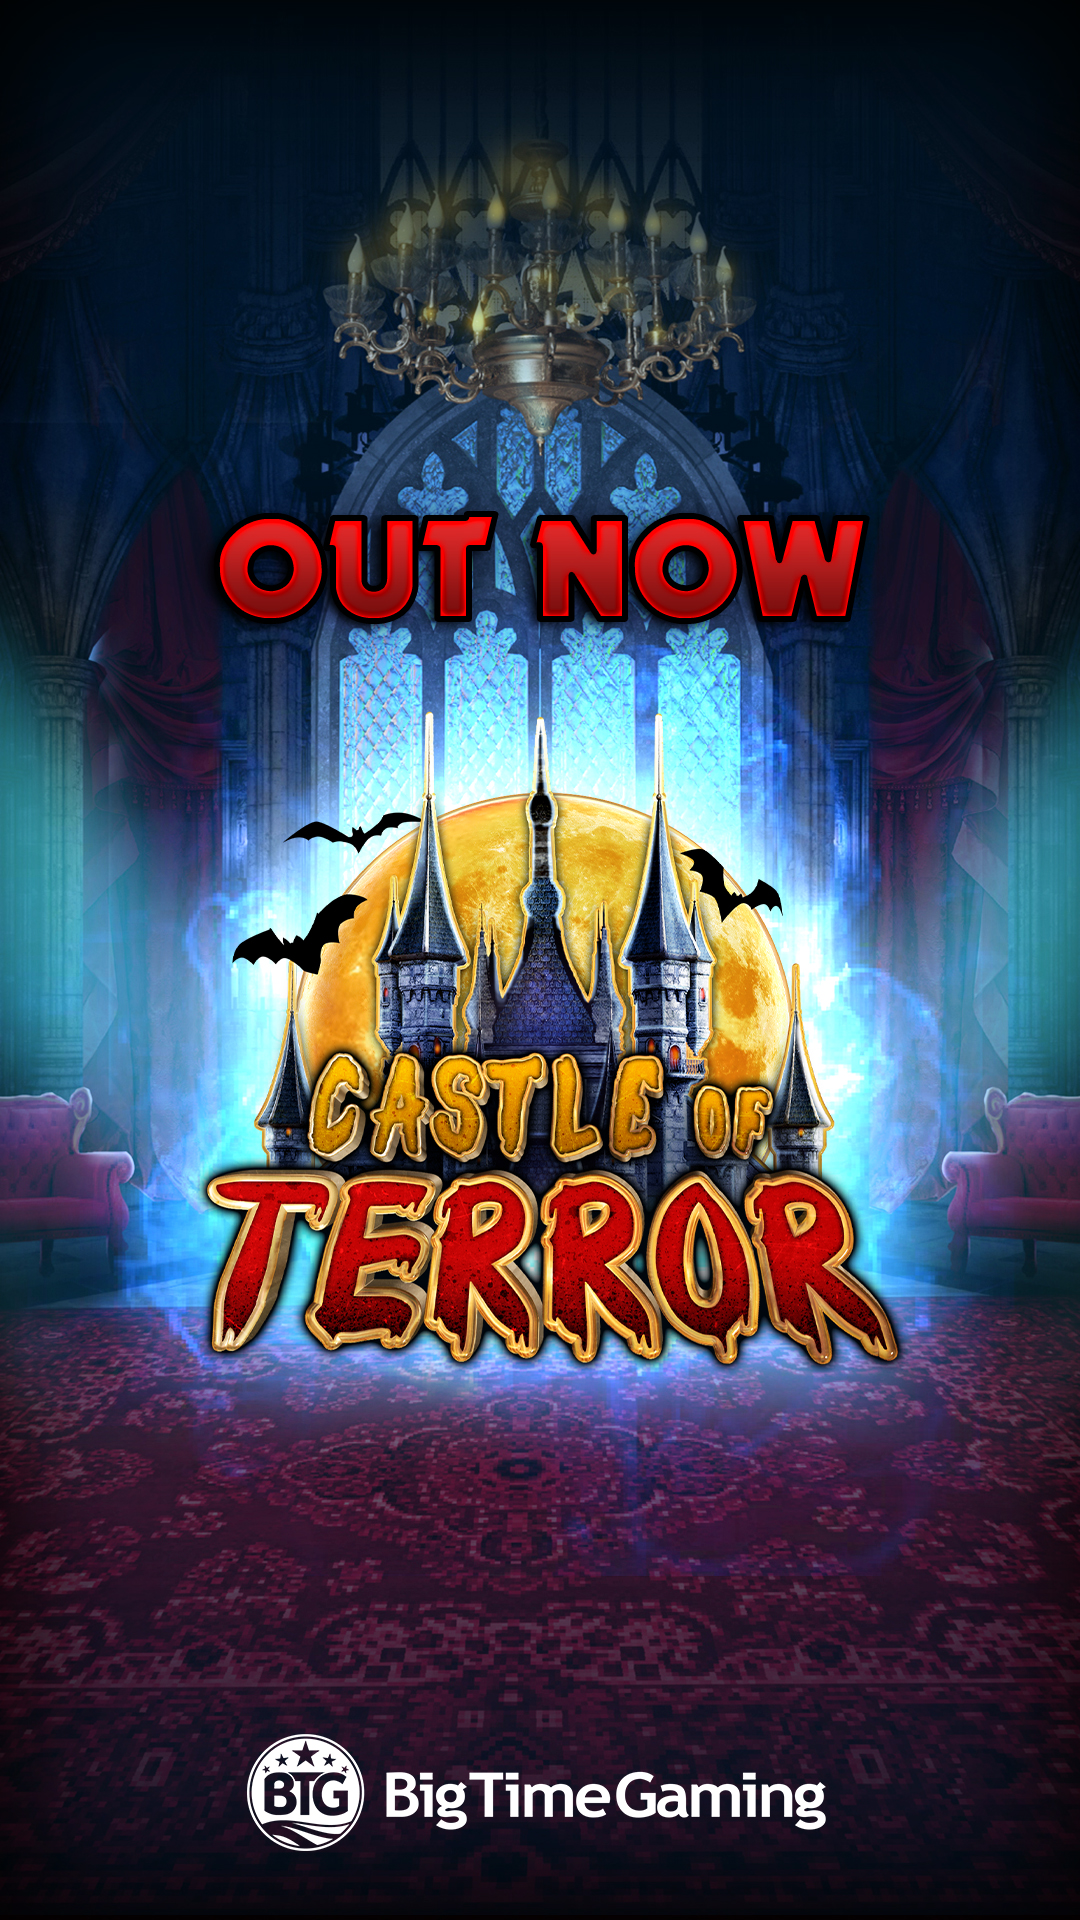 castle_of_terror_instagram_story_out_now_1080x1920.jpg thumbnail